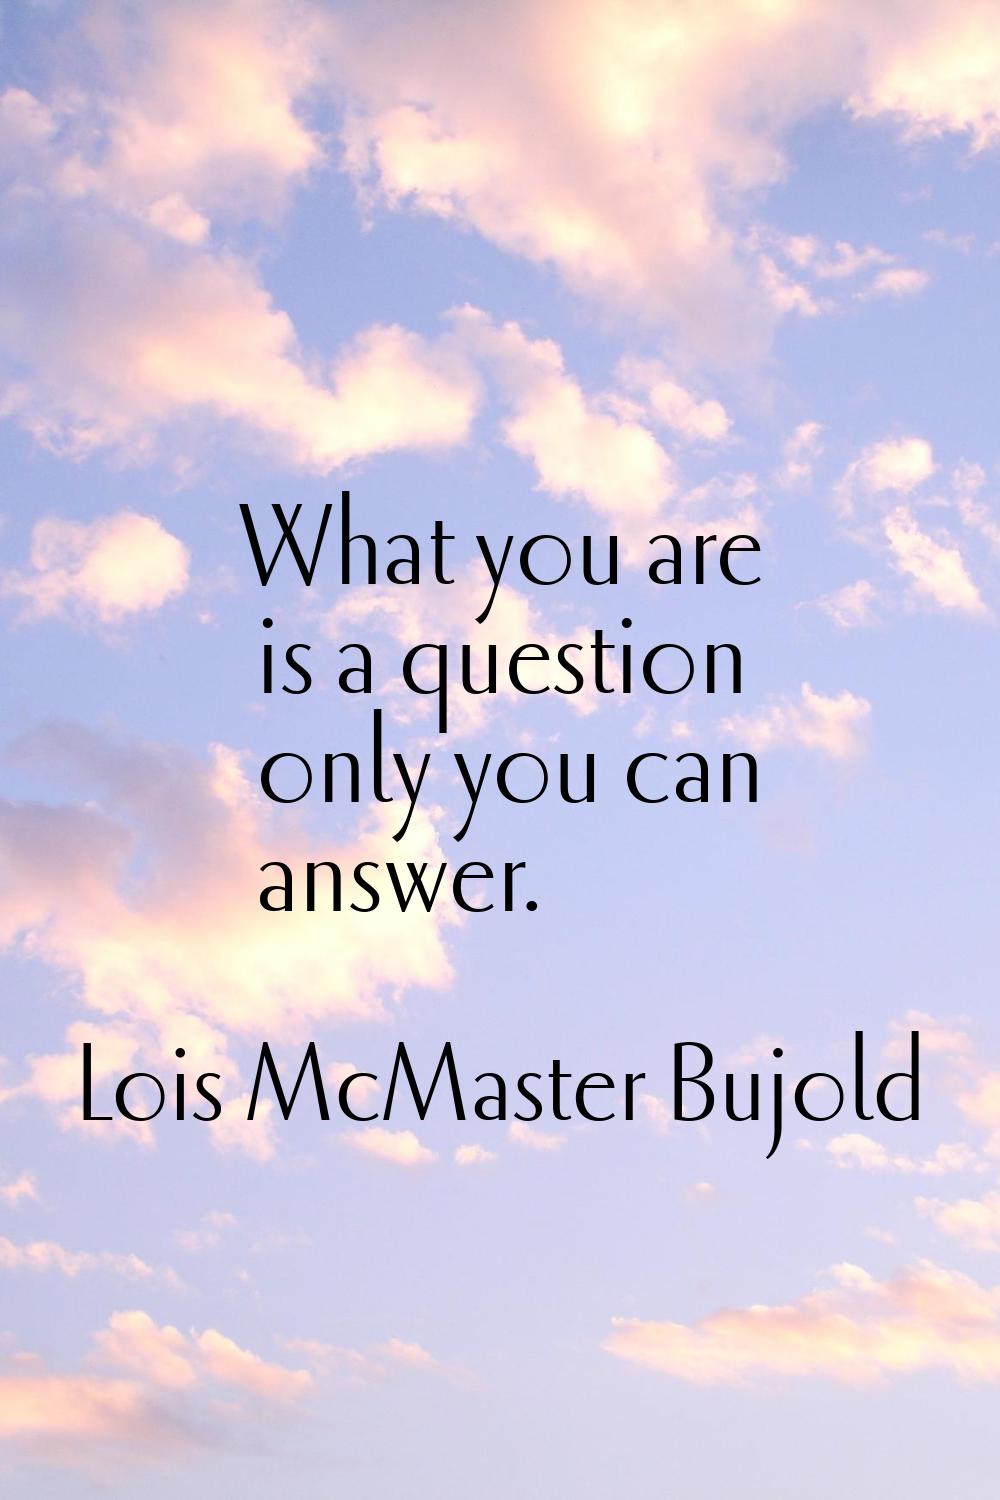 What you are is a question only you can answer.